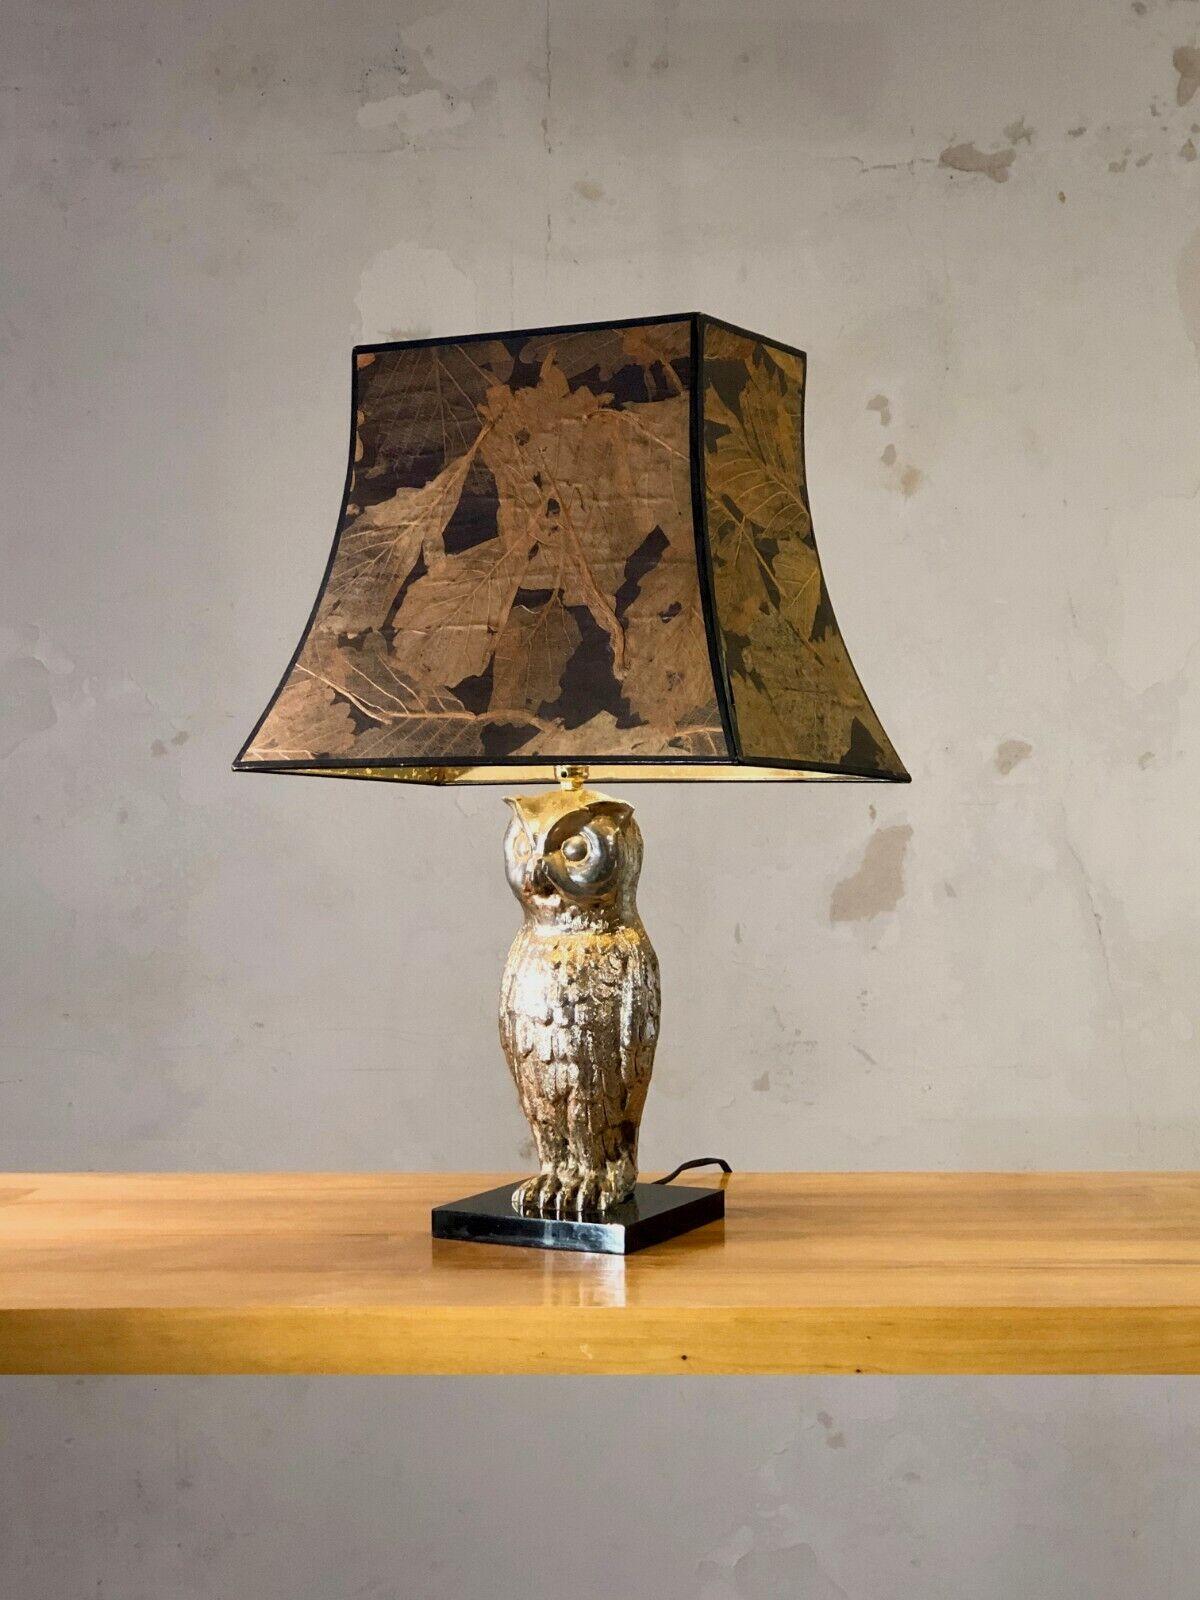 An elegant and spectacular owl lamp, Art-deco, Modernist, Neo-Classical, Shabby-Chic, superb owl in silver metal topped with a pagoda lampshade with a composition of leaves, to be attributed, France 1960.

SOLD WITH LAMPSHADE.

DIMENSIONS: 61 x 40 x